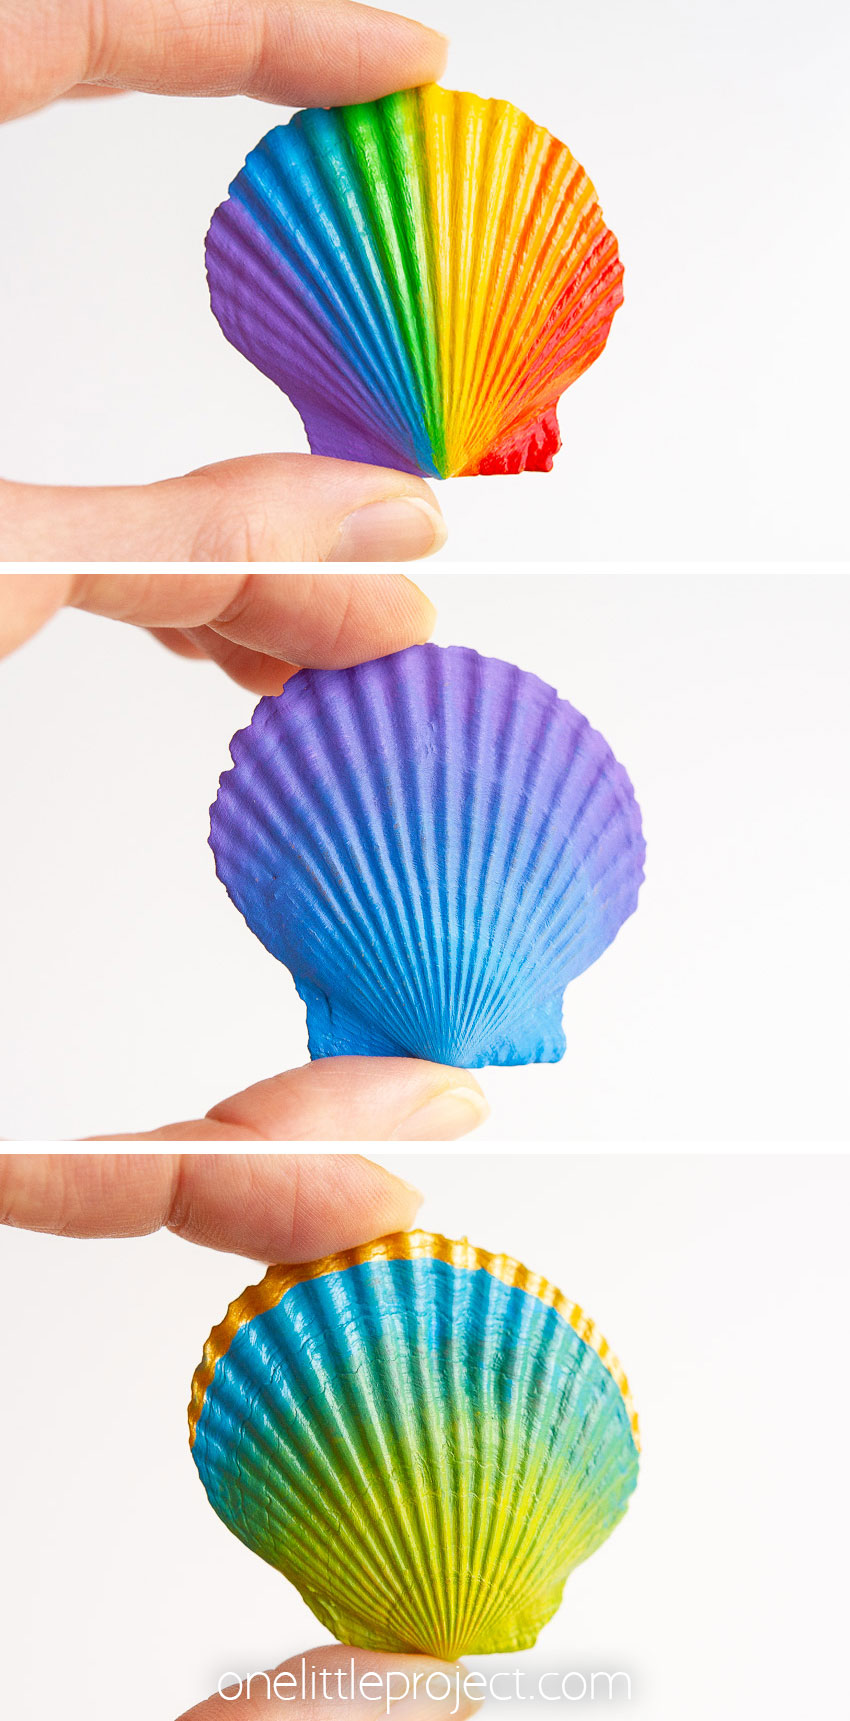 Three images showing a hand holding different seashells painted